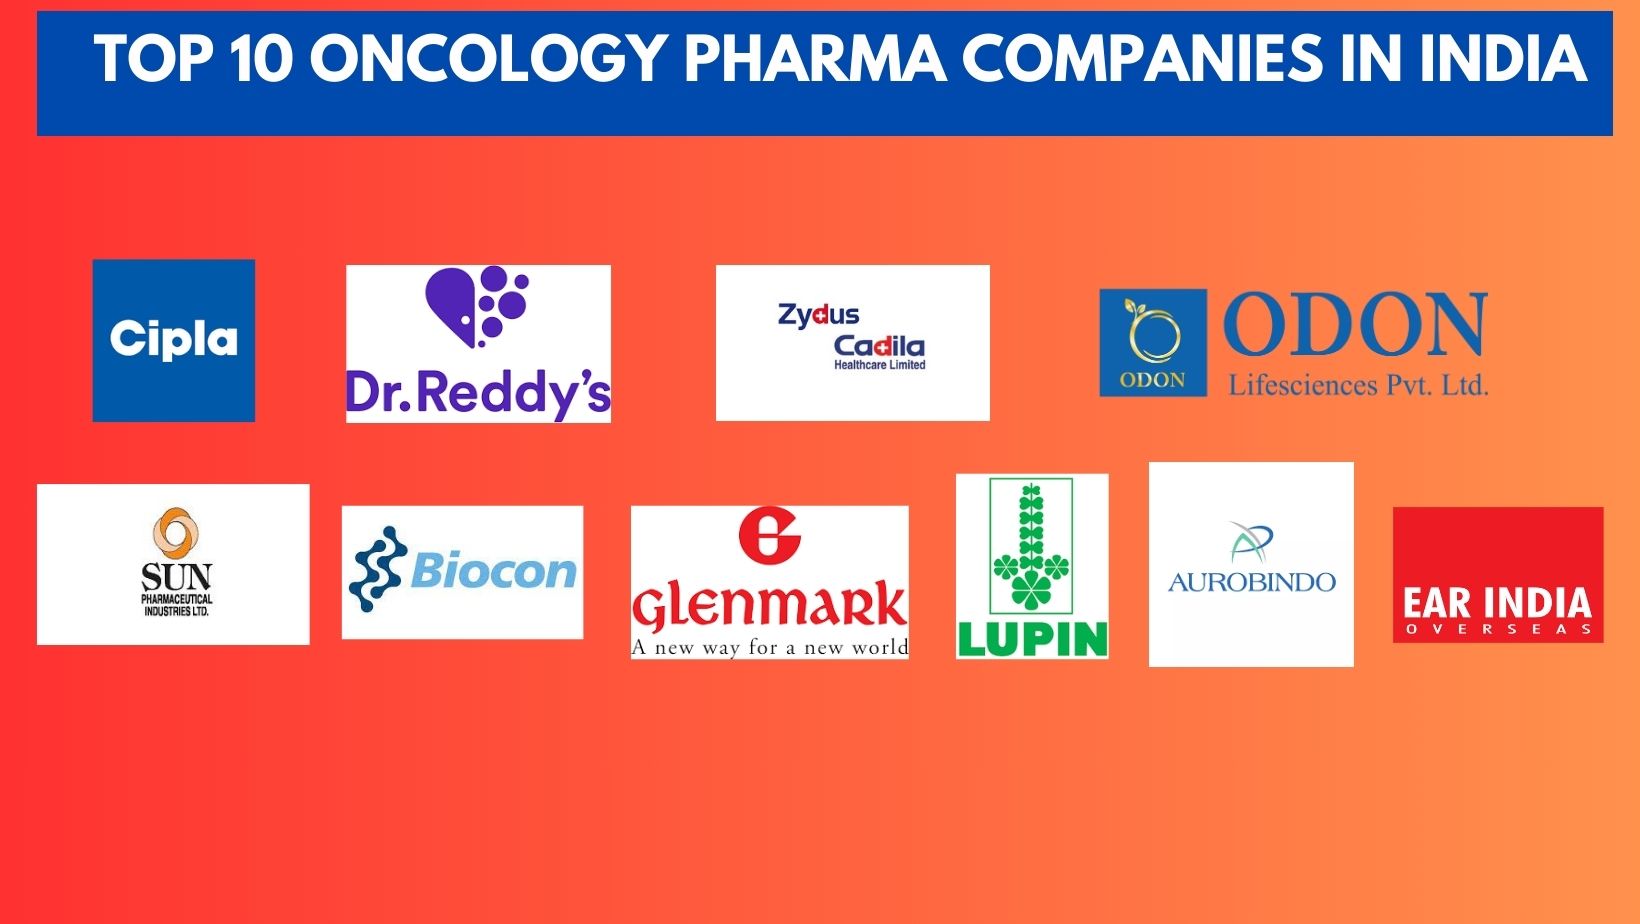 Top 10 Oncology Pharma Companies In India